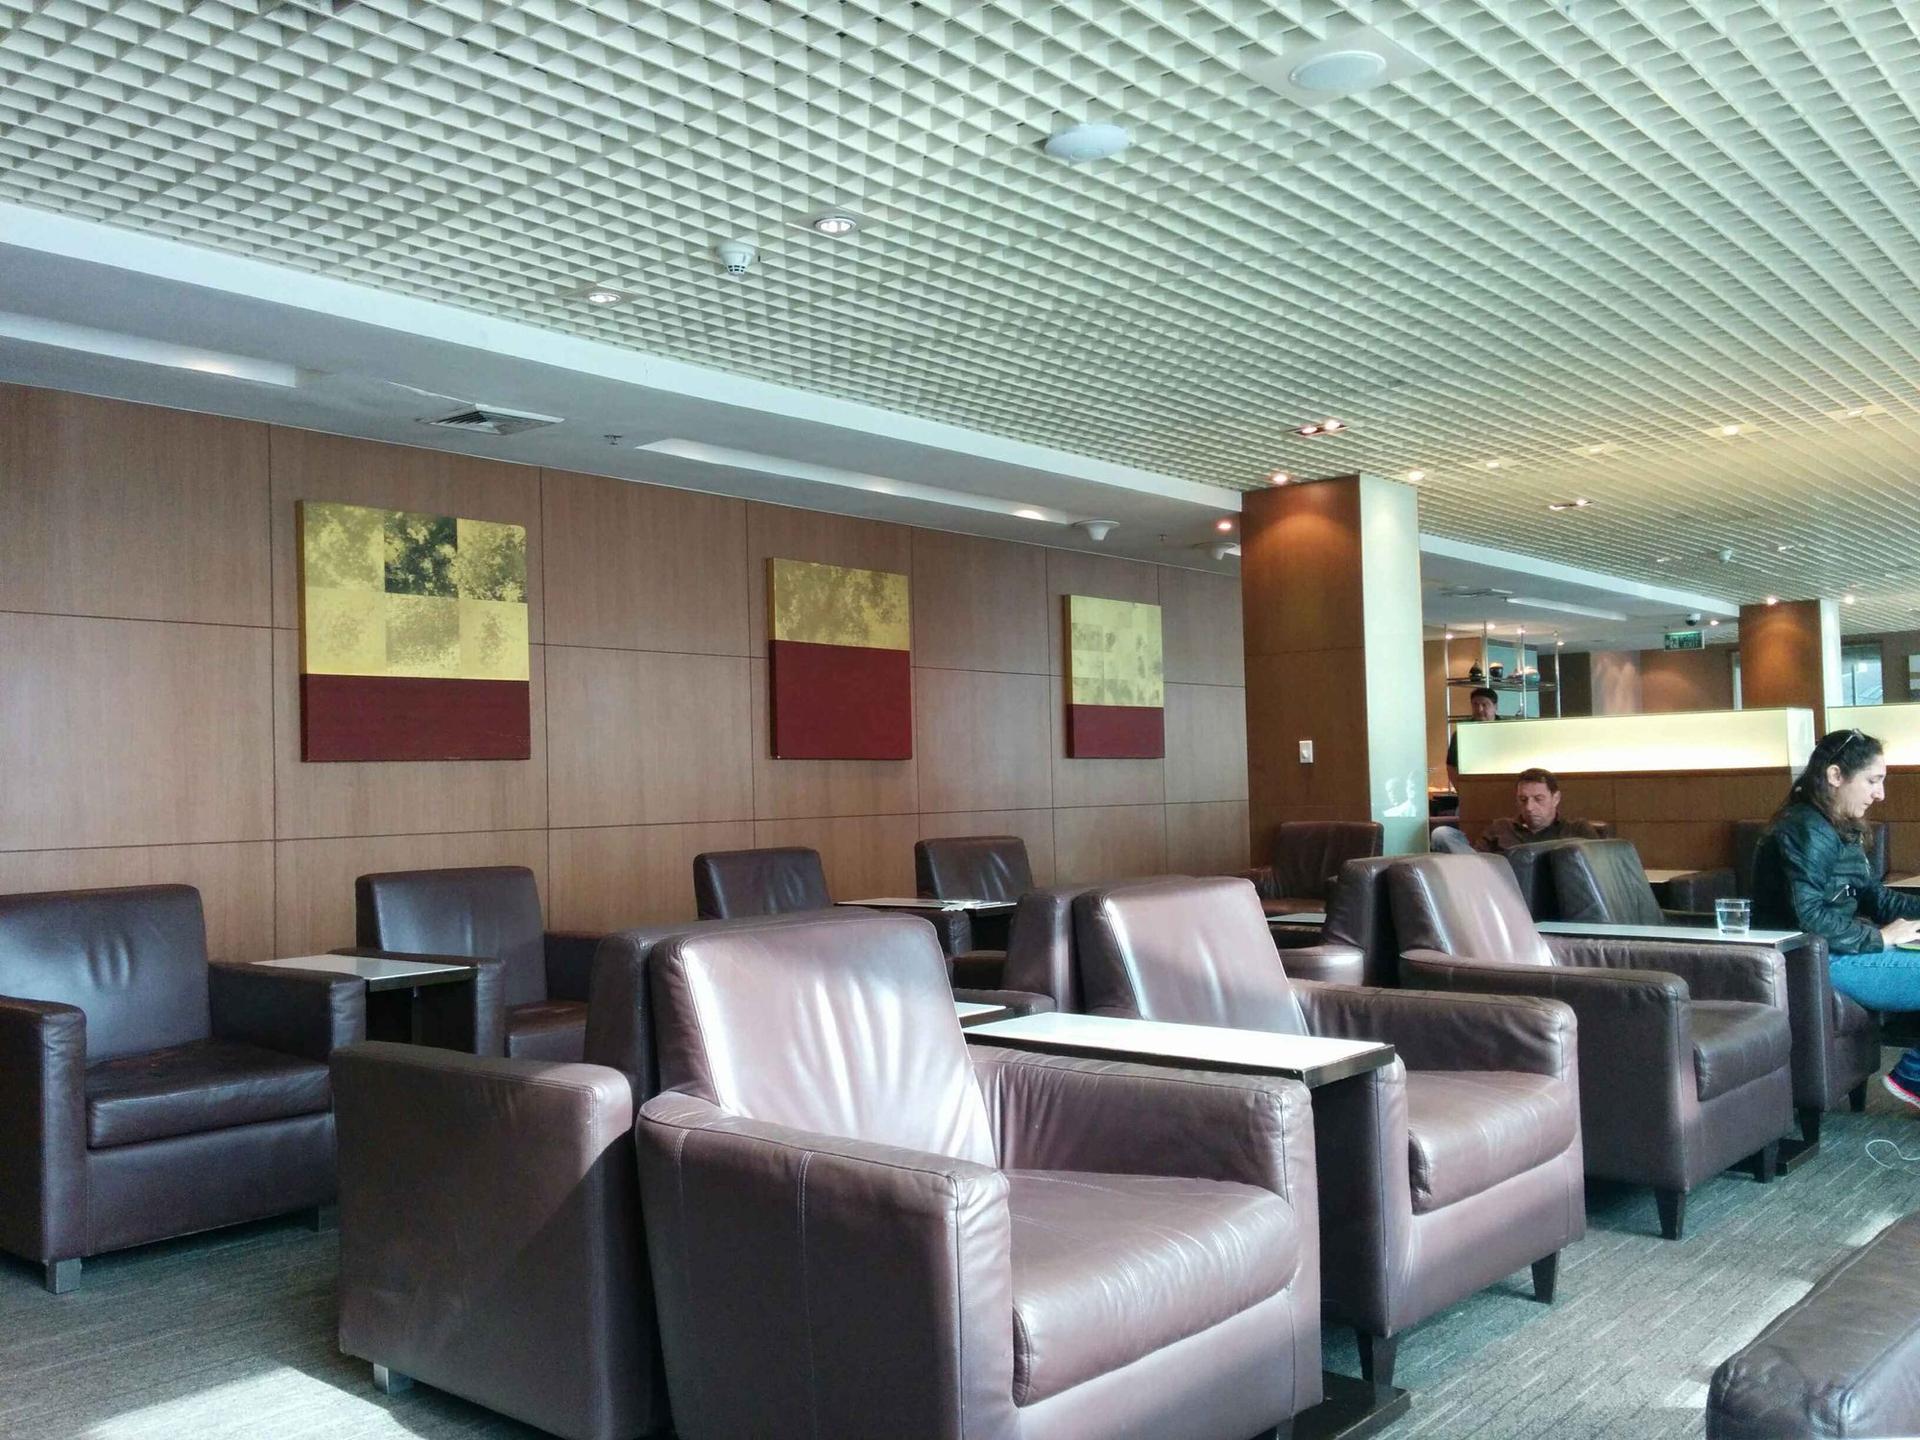 Thai Airways Royal Orchid Lounge image 5 of 15